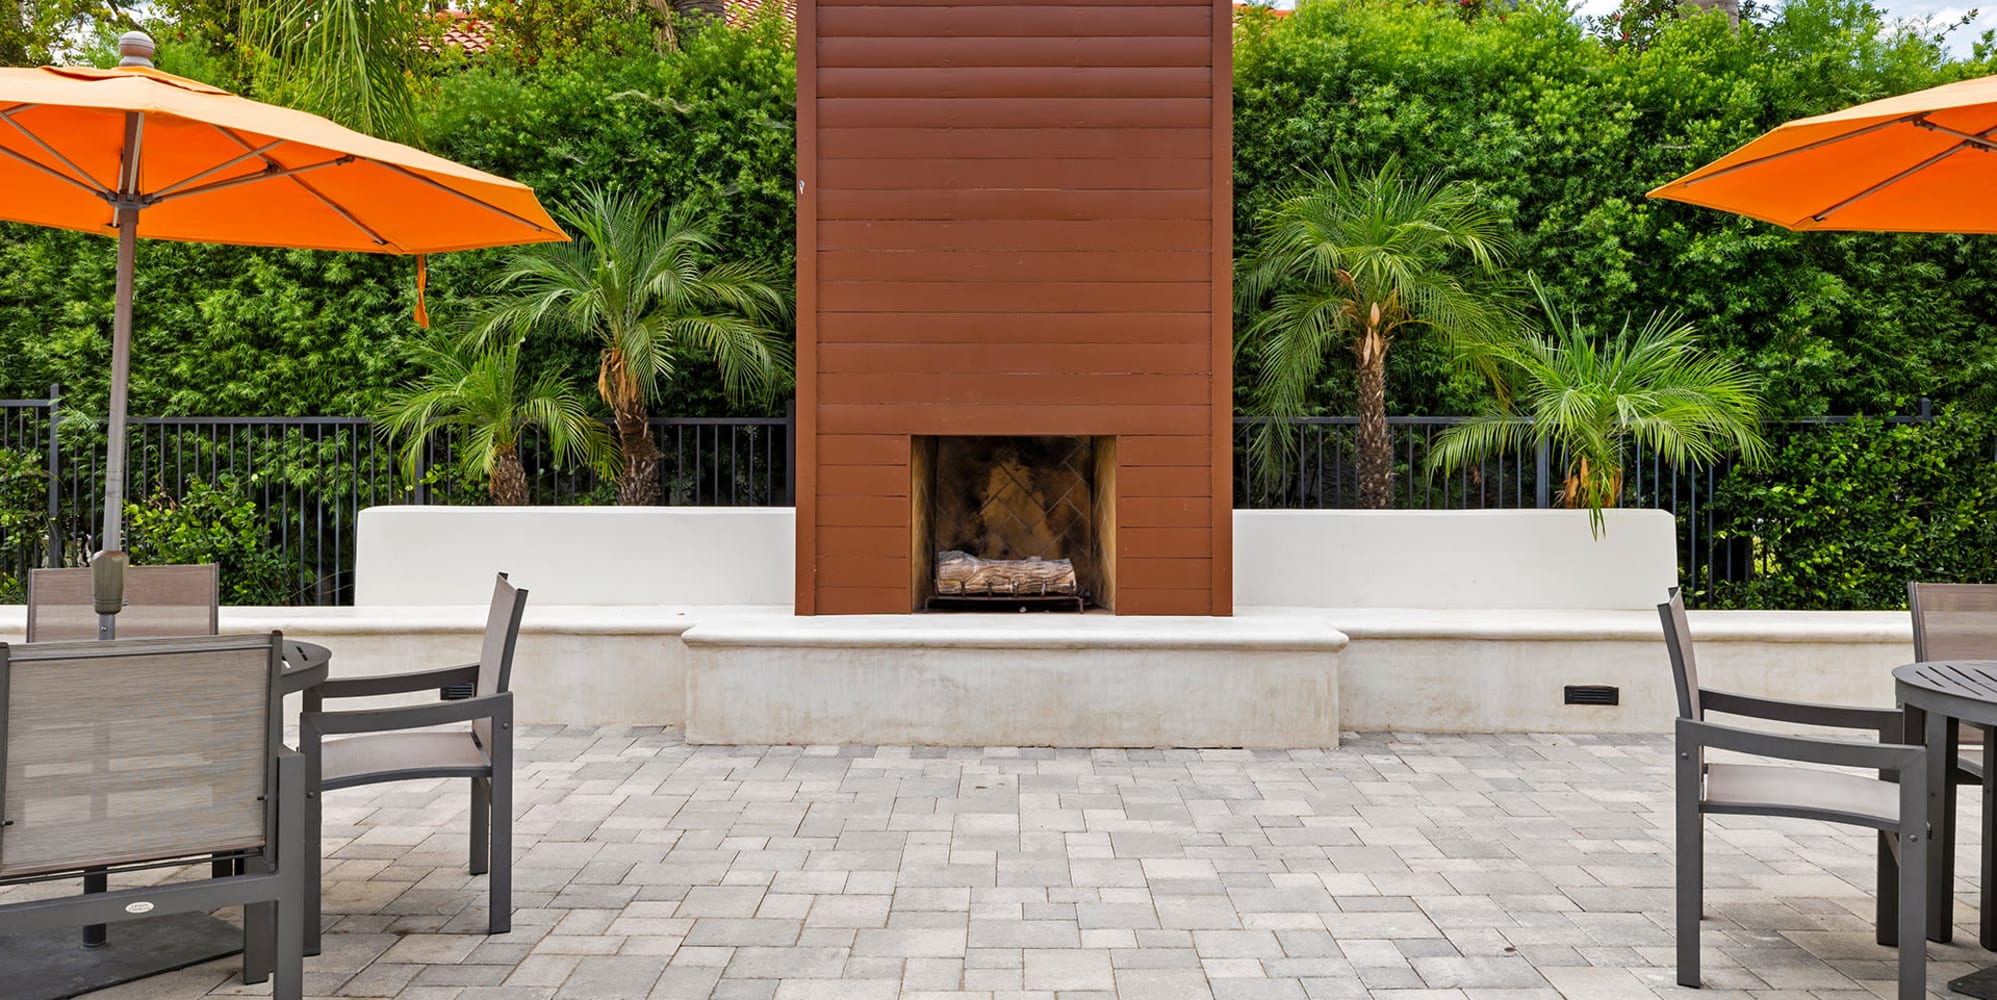 Fireplace in the courtyard at Trails at Grand Terrace in Colton, California